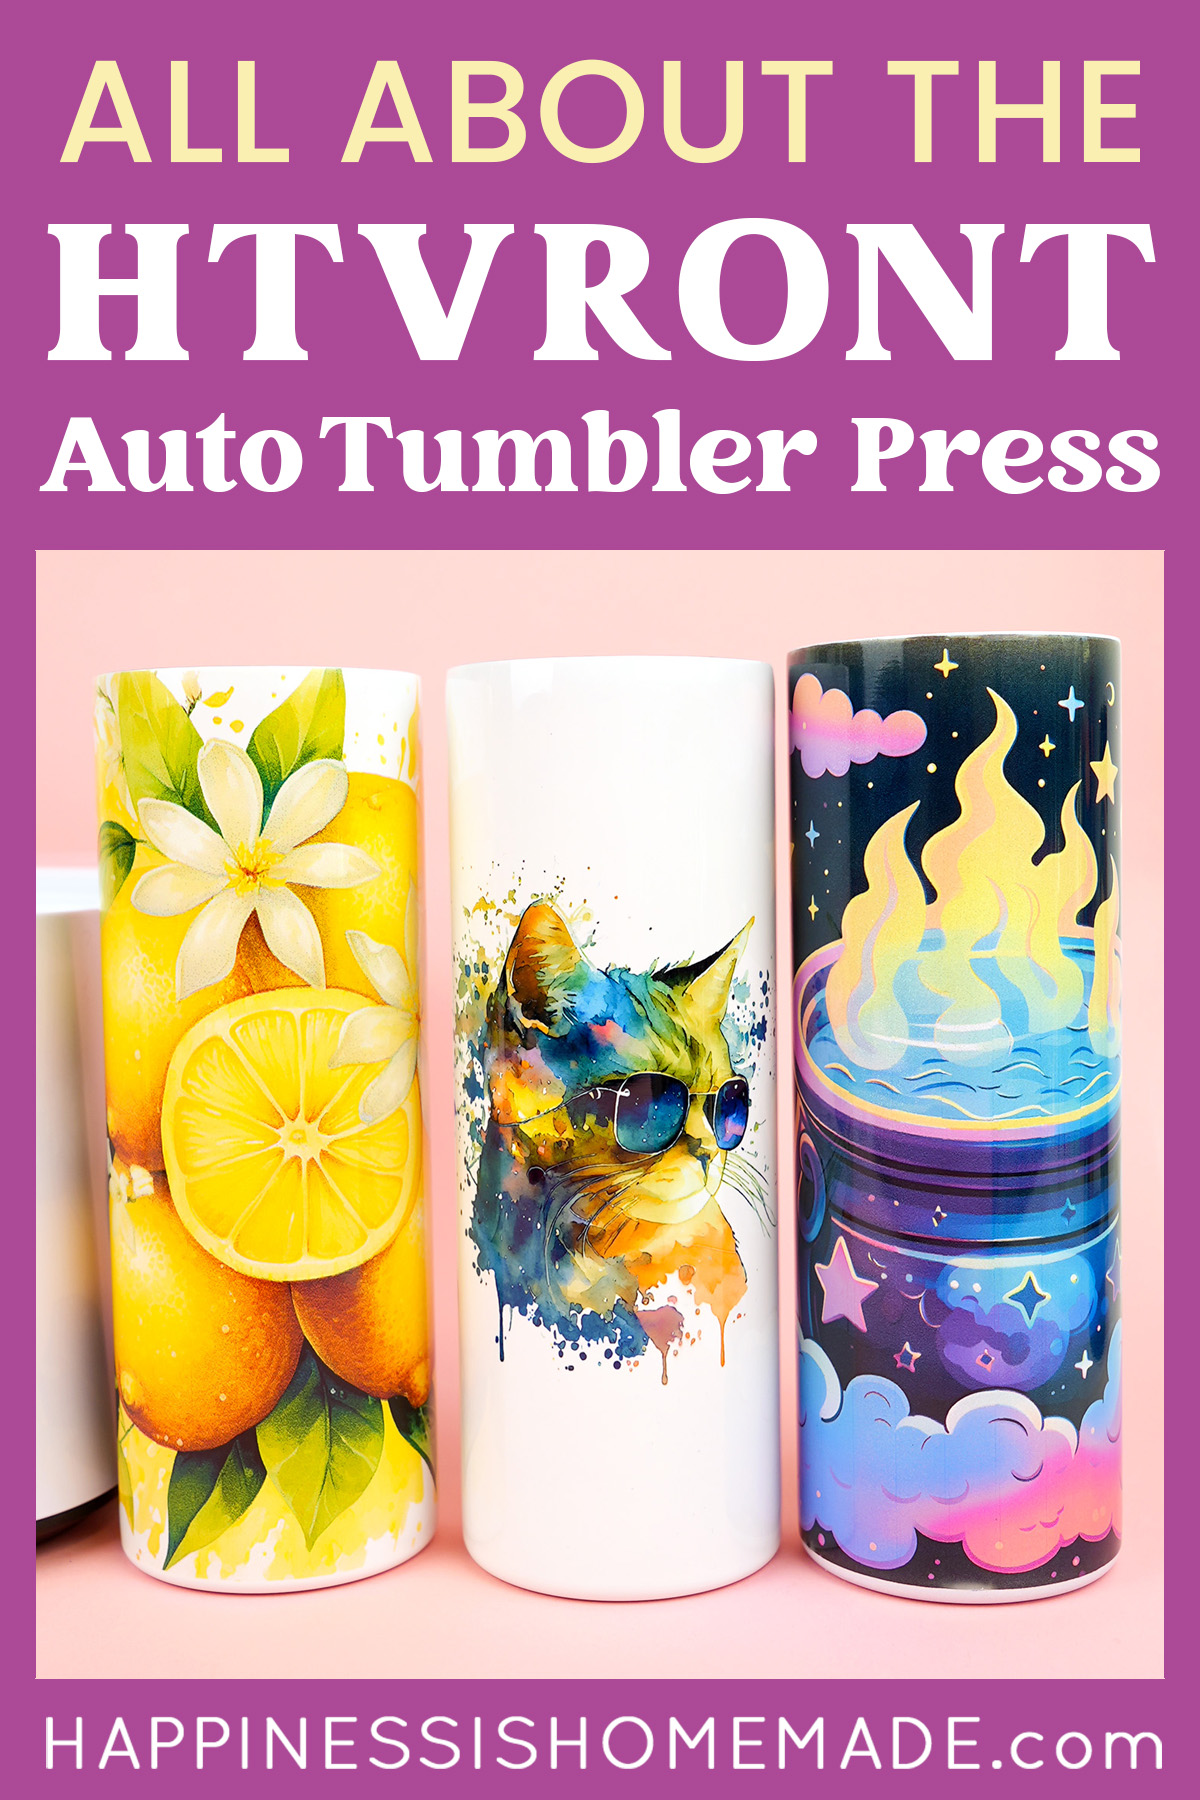 HTVRONT Auto Tumbler Press Review - Happiness is Homemade